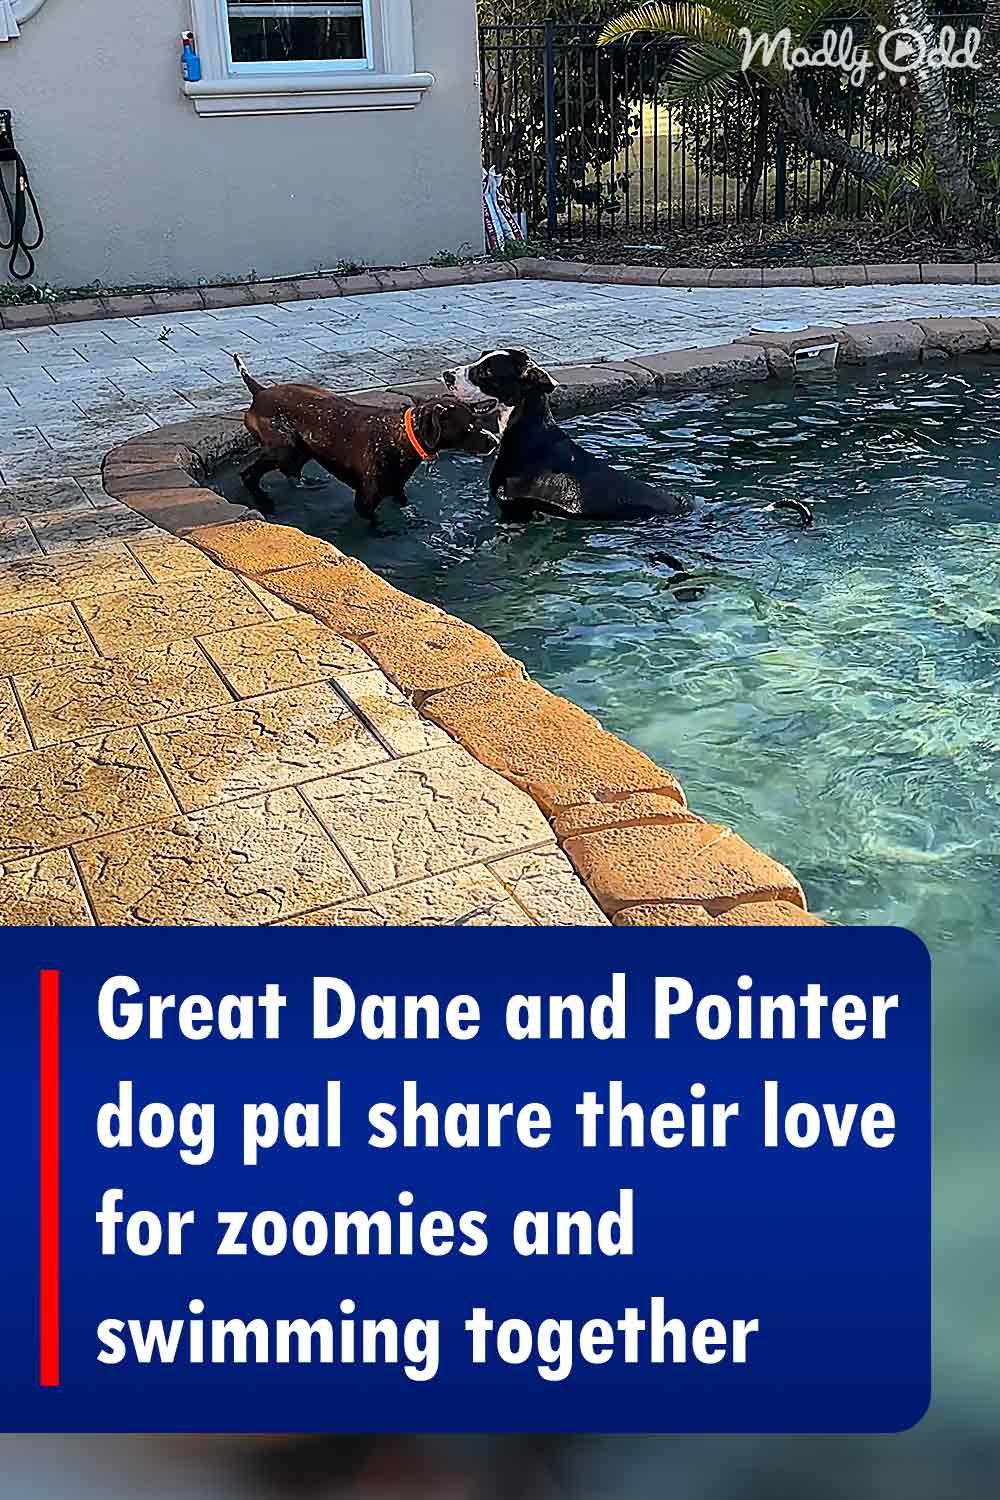 Great Dane and Pointer dog pal share their love for zoomies and swimming together